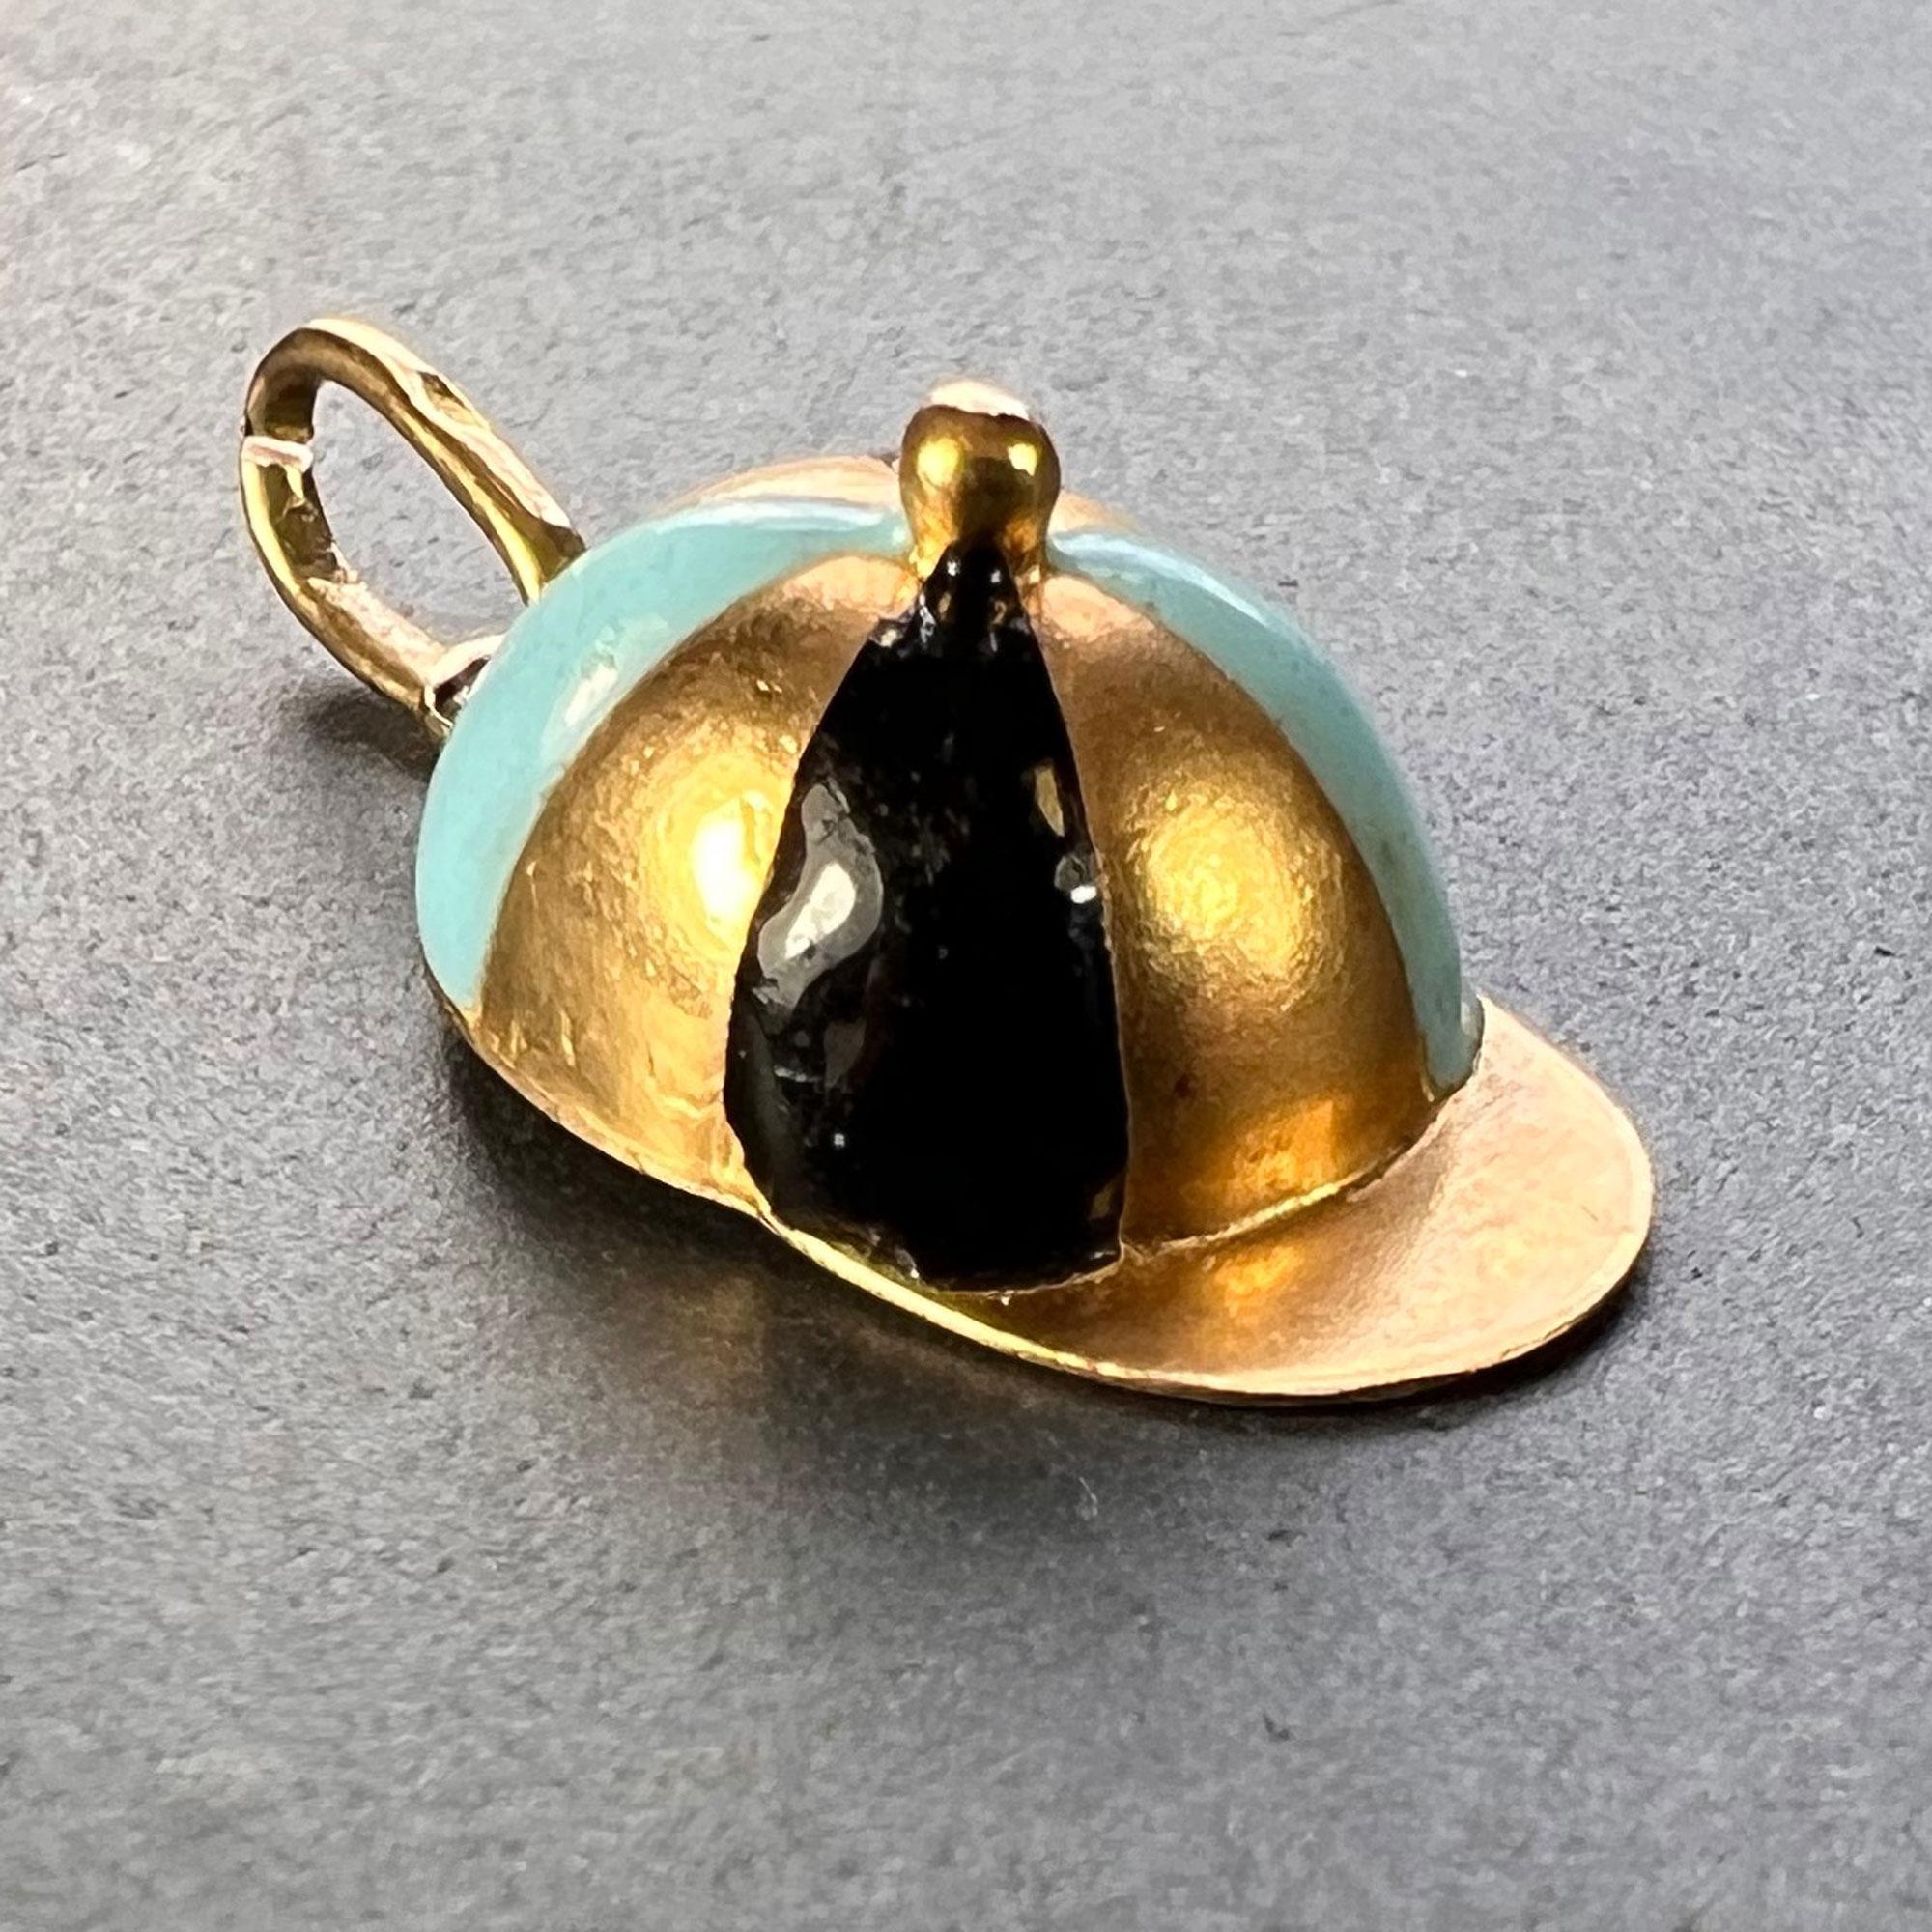 An 18 karat (18K) yellow gold charm pendant designed as a horse riding or jockey hat with blue and black enamel detail. Stamped 750 for 18 karat gold and 1 AR for Italian manufacture and Gori & Zucchi to the bail.
 
Dimensions: 2 x 1.1 x 0.8 cm (not